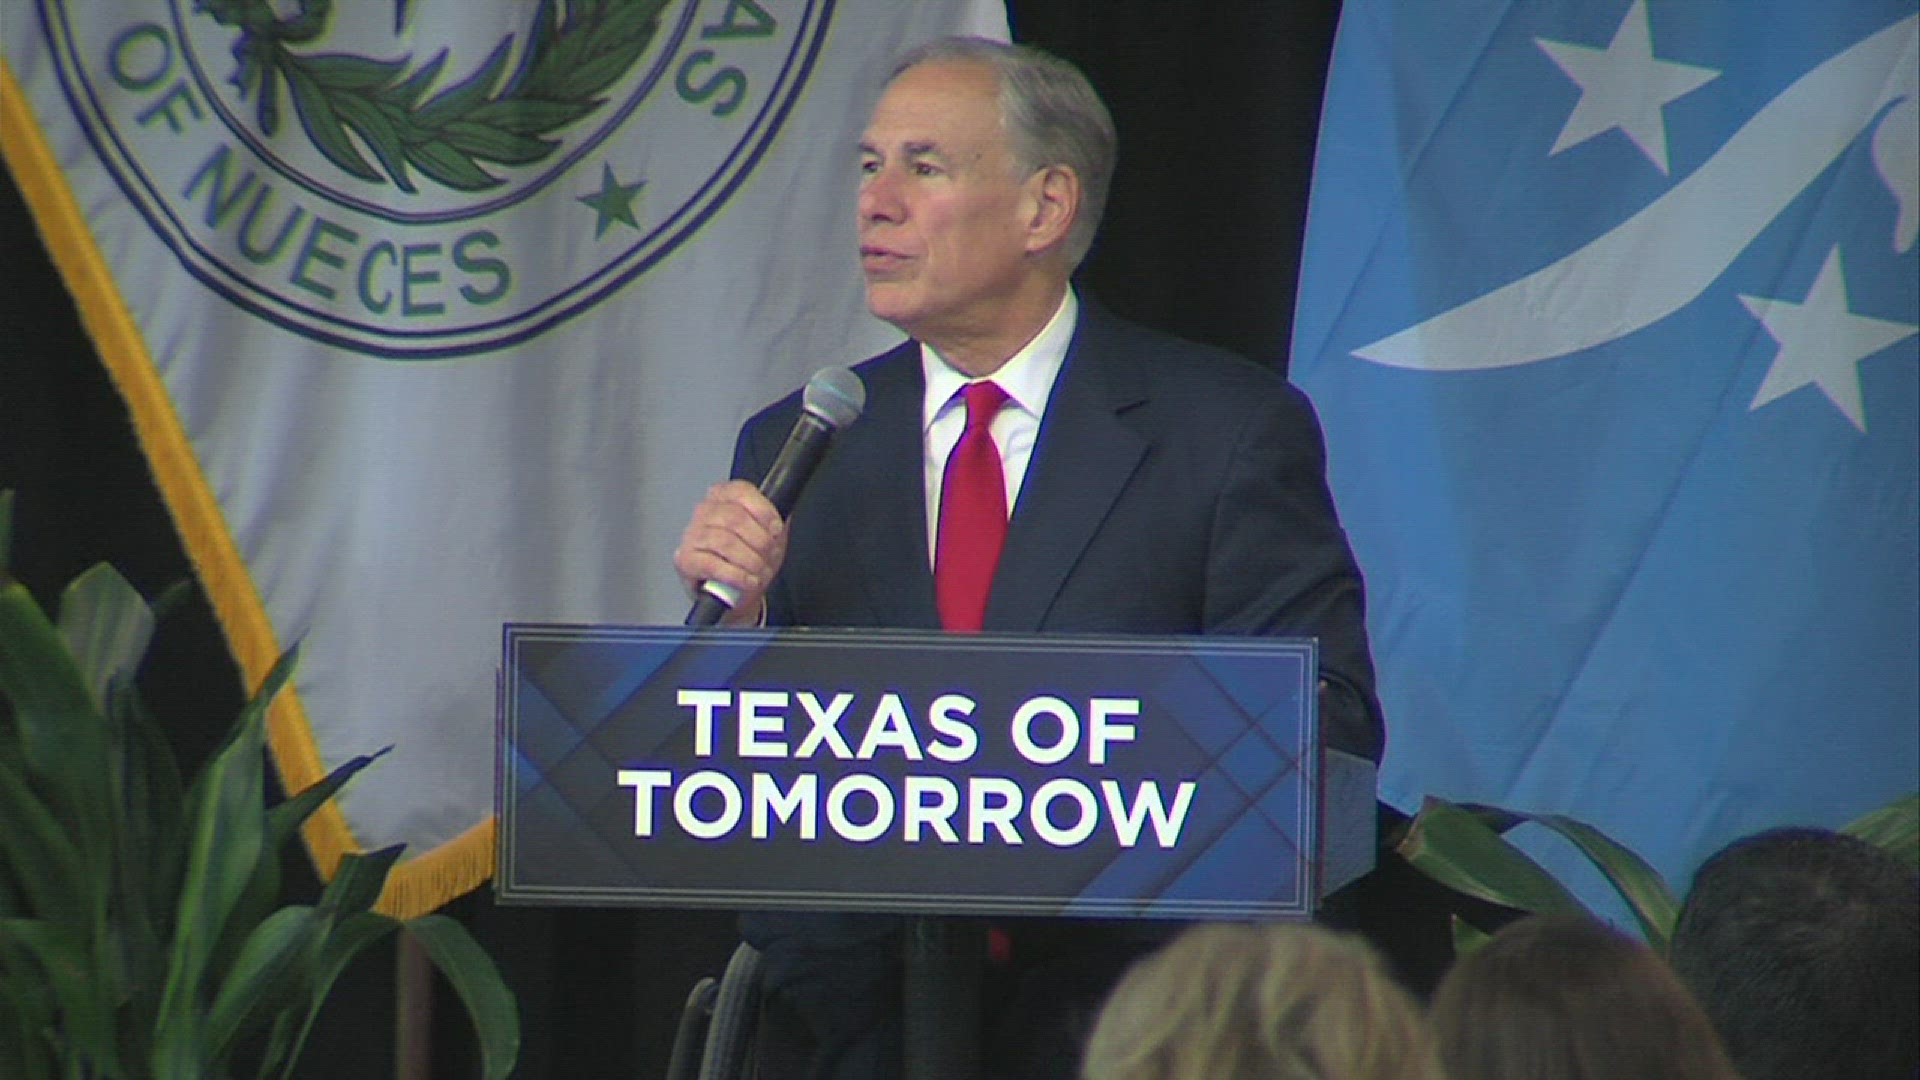 The governor was in town on Monday and covered a range of topics important to the Coastal Bend.